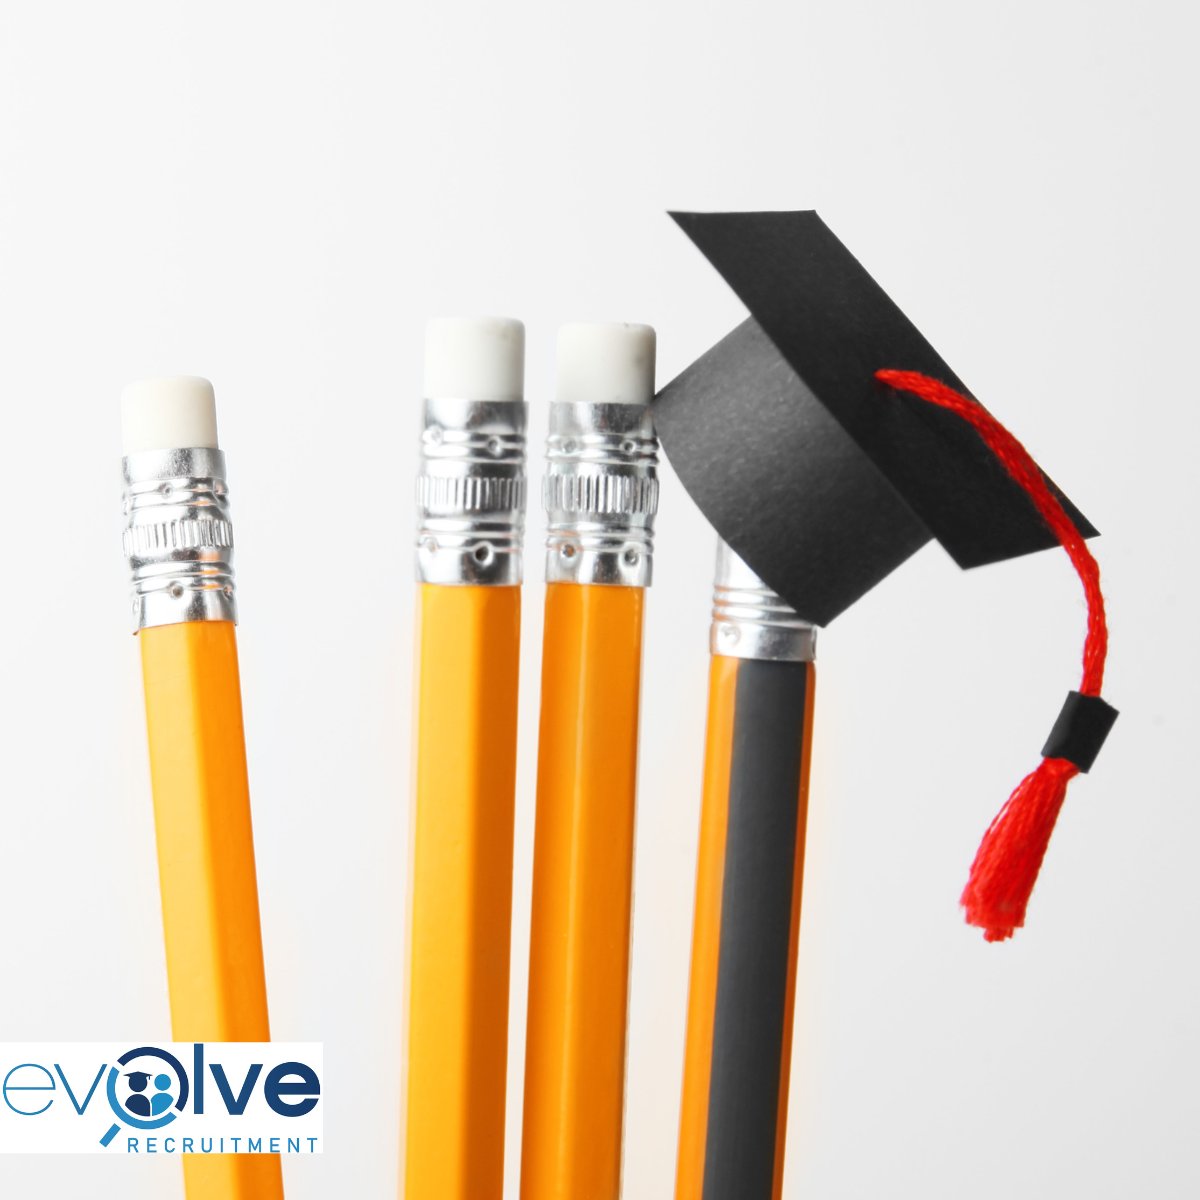 We are an education recruitment agency that specialises in securing work for education professionals into longer term or permanent positions across the UK.

Get in touch with us today:

evolve-ed.co.uk

#EvolveRecruitment #Teaching #JobOpportunities